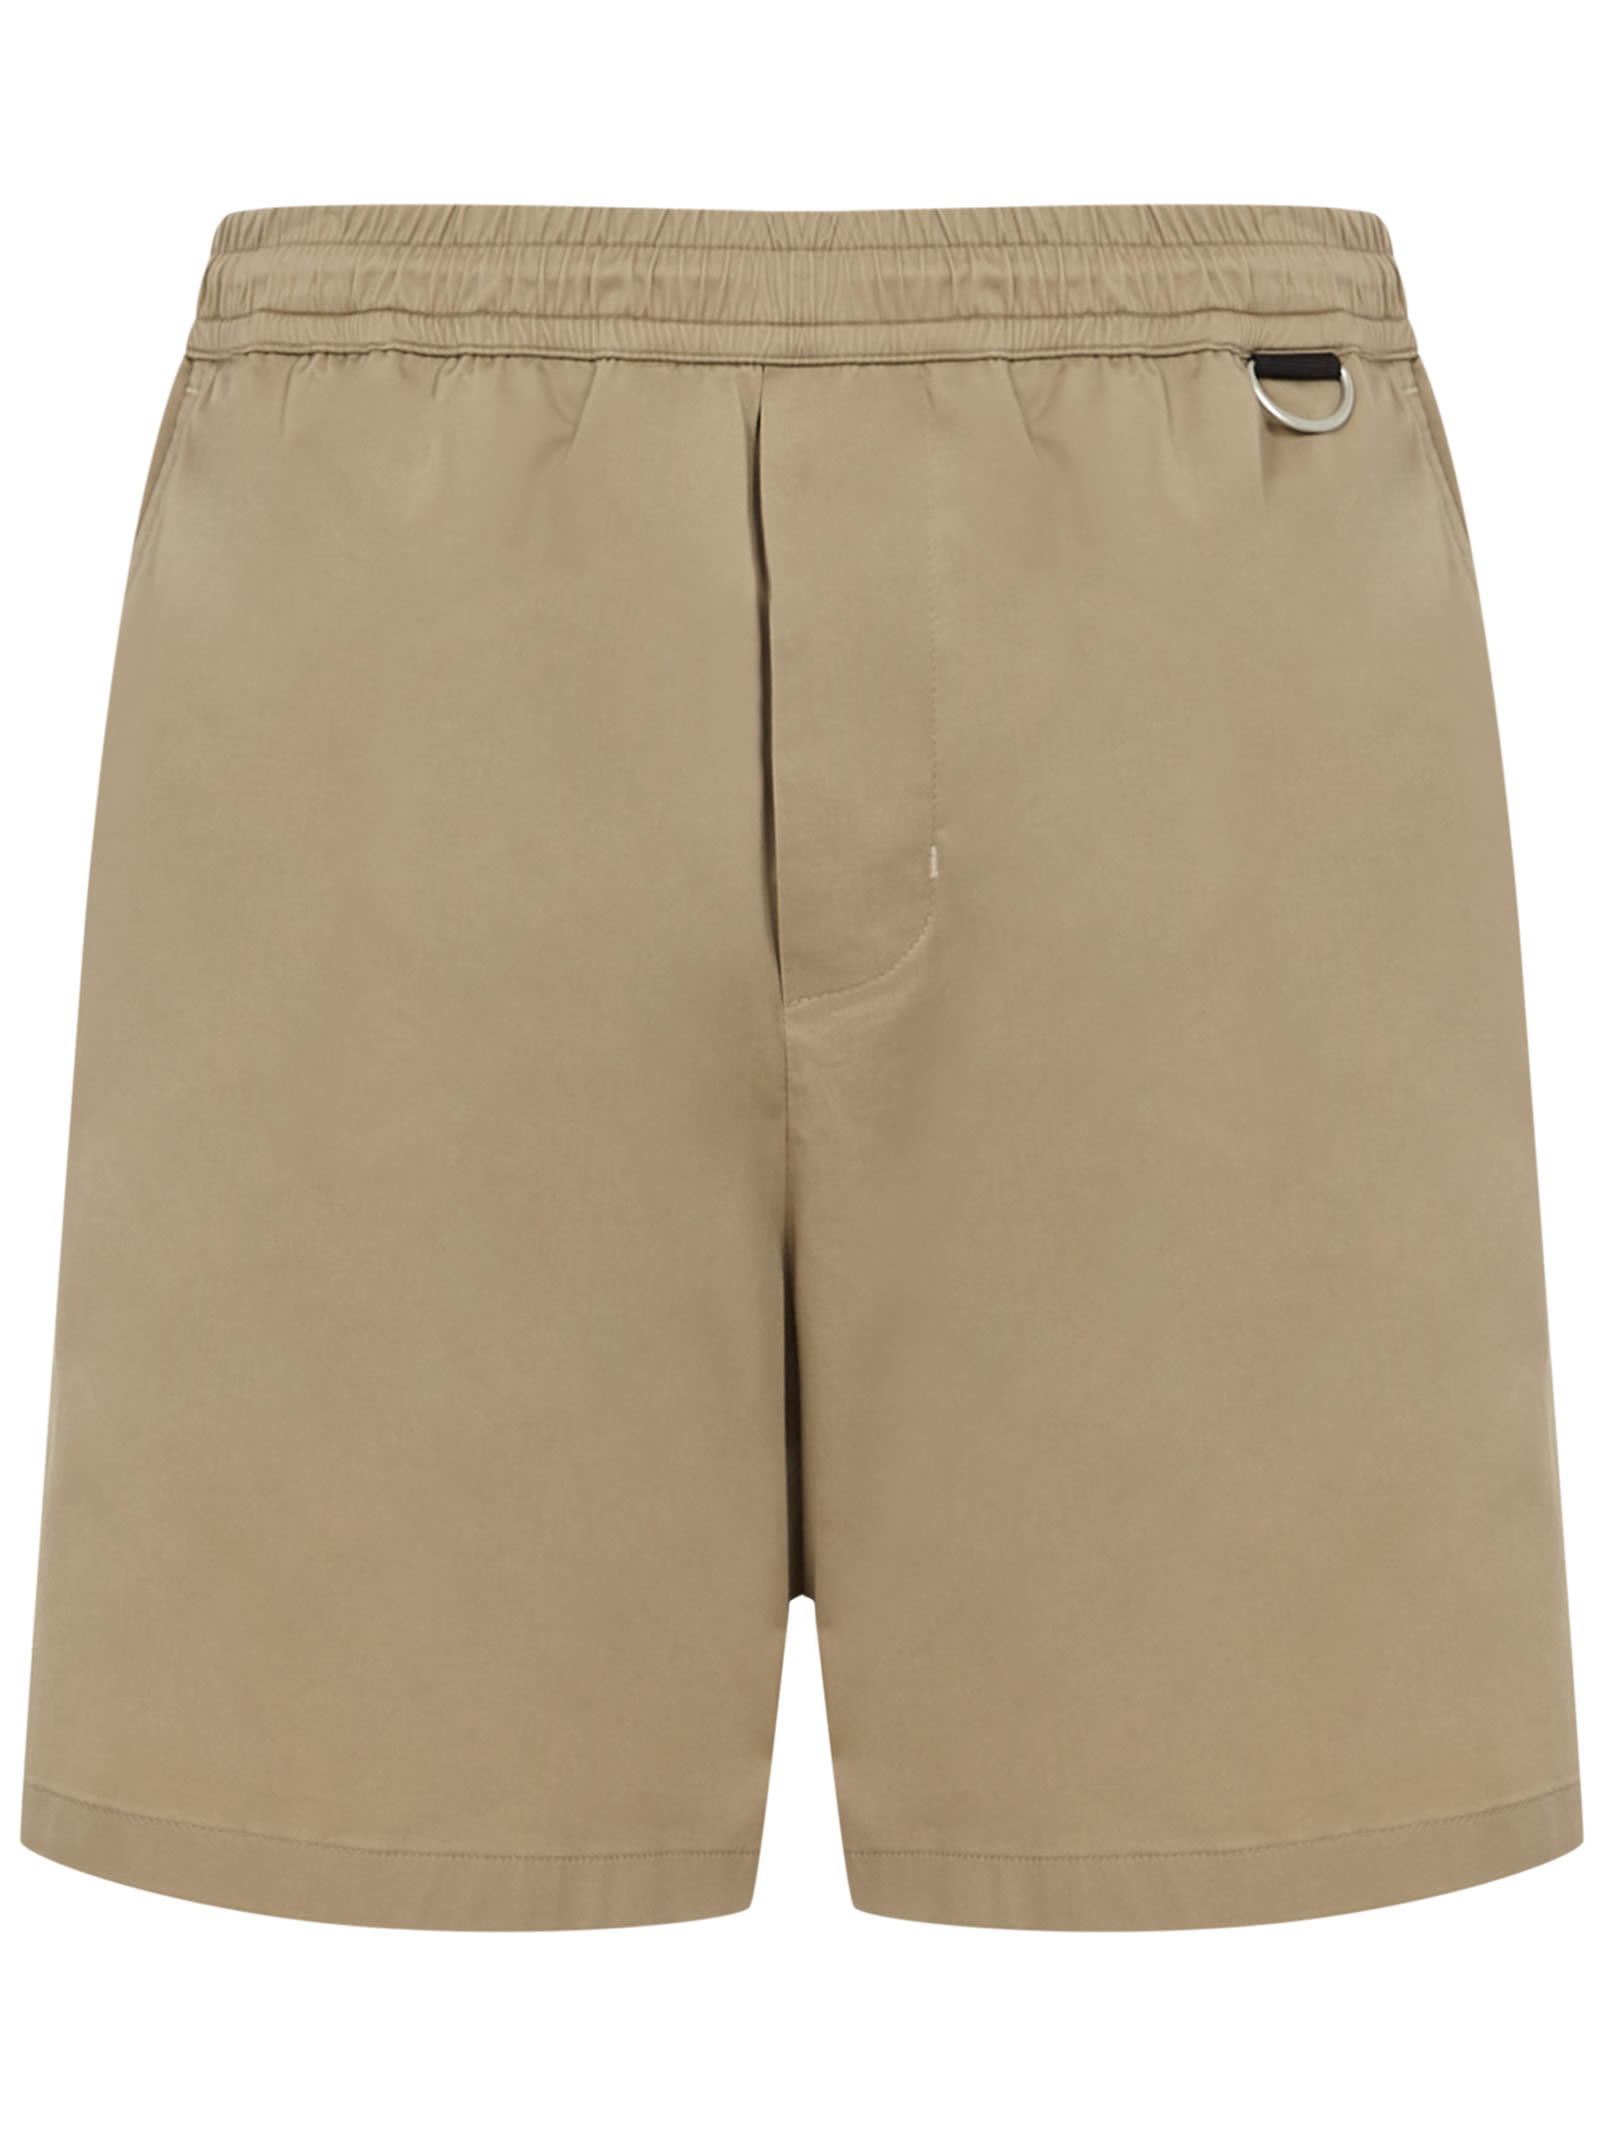 Low Brand shorts